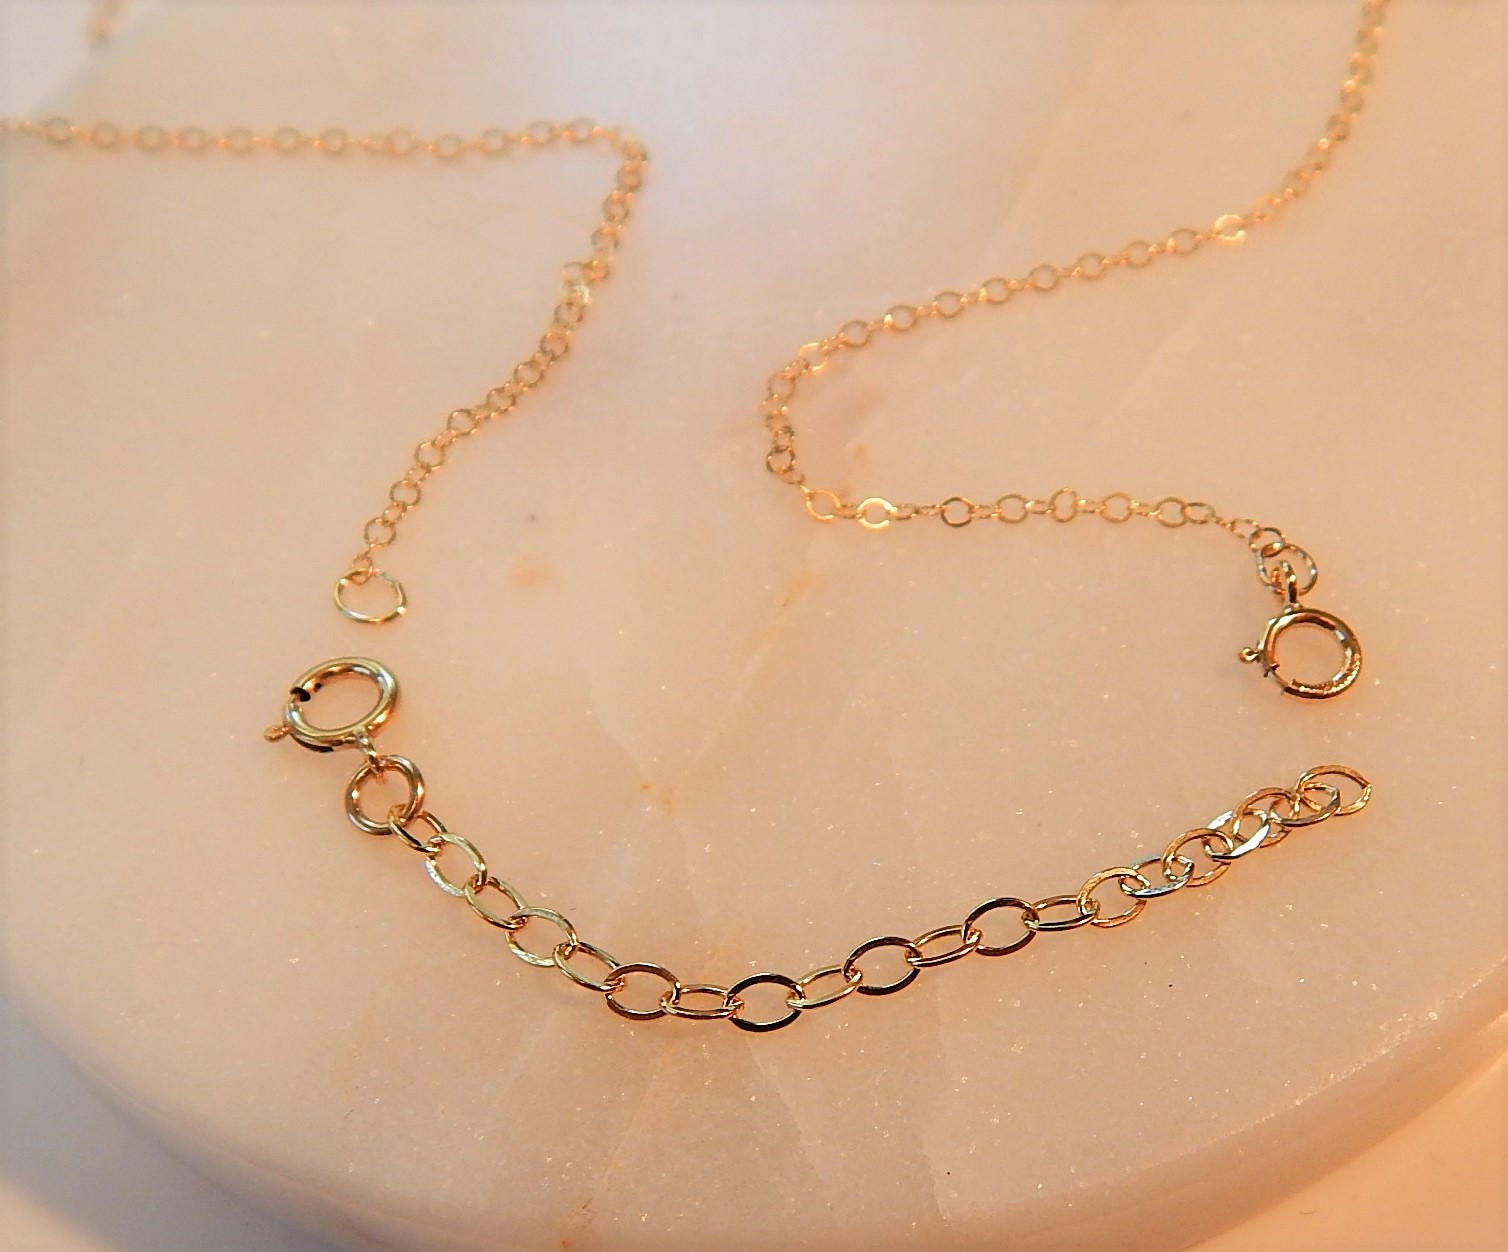 Extension Chain, Extender Chain, 14k Gold Filled, Sterling Silver, Rose  Gold Filled Chain Extenders for Necklace or Bracelet -  New Zealand